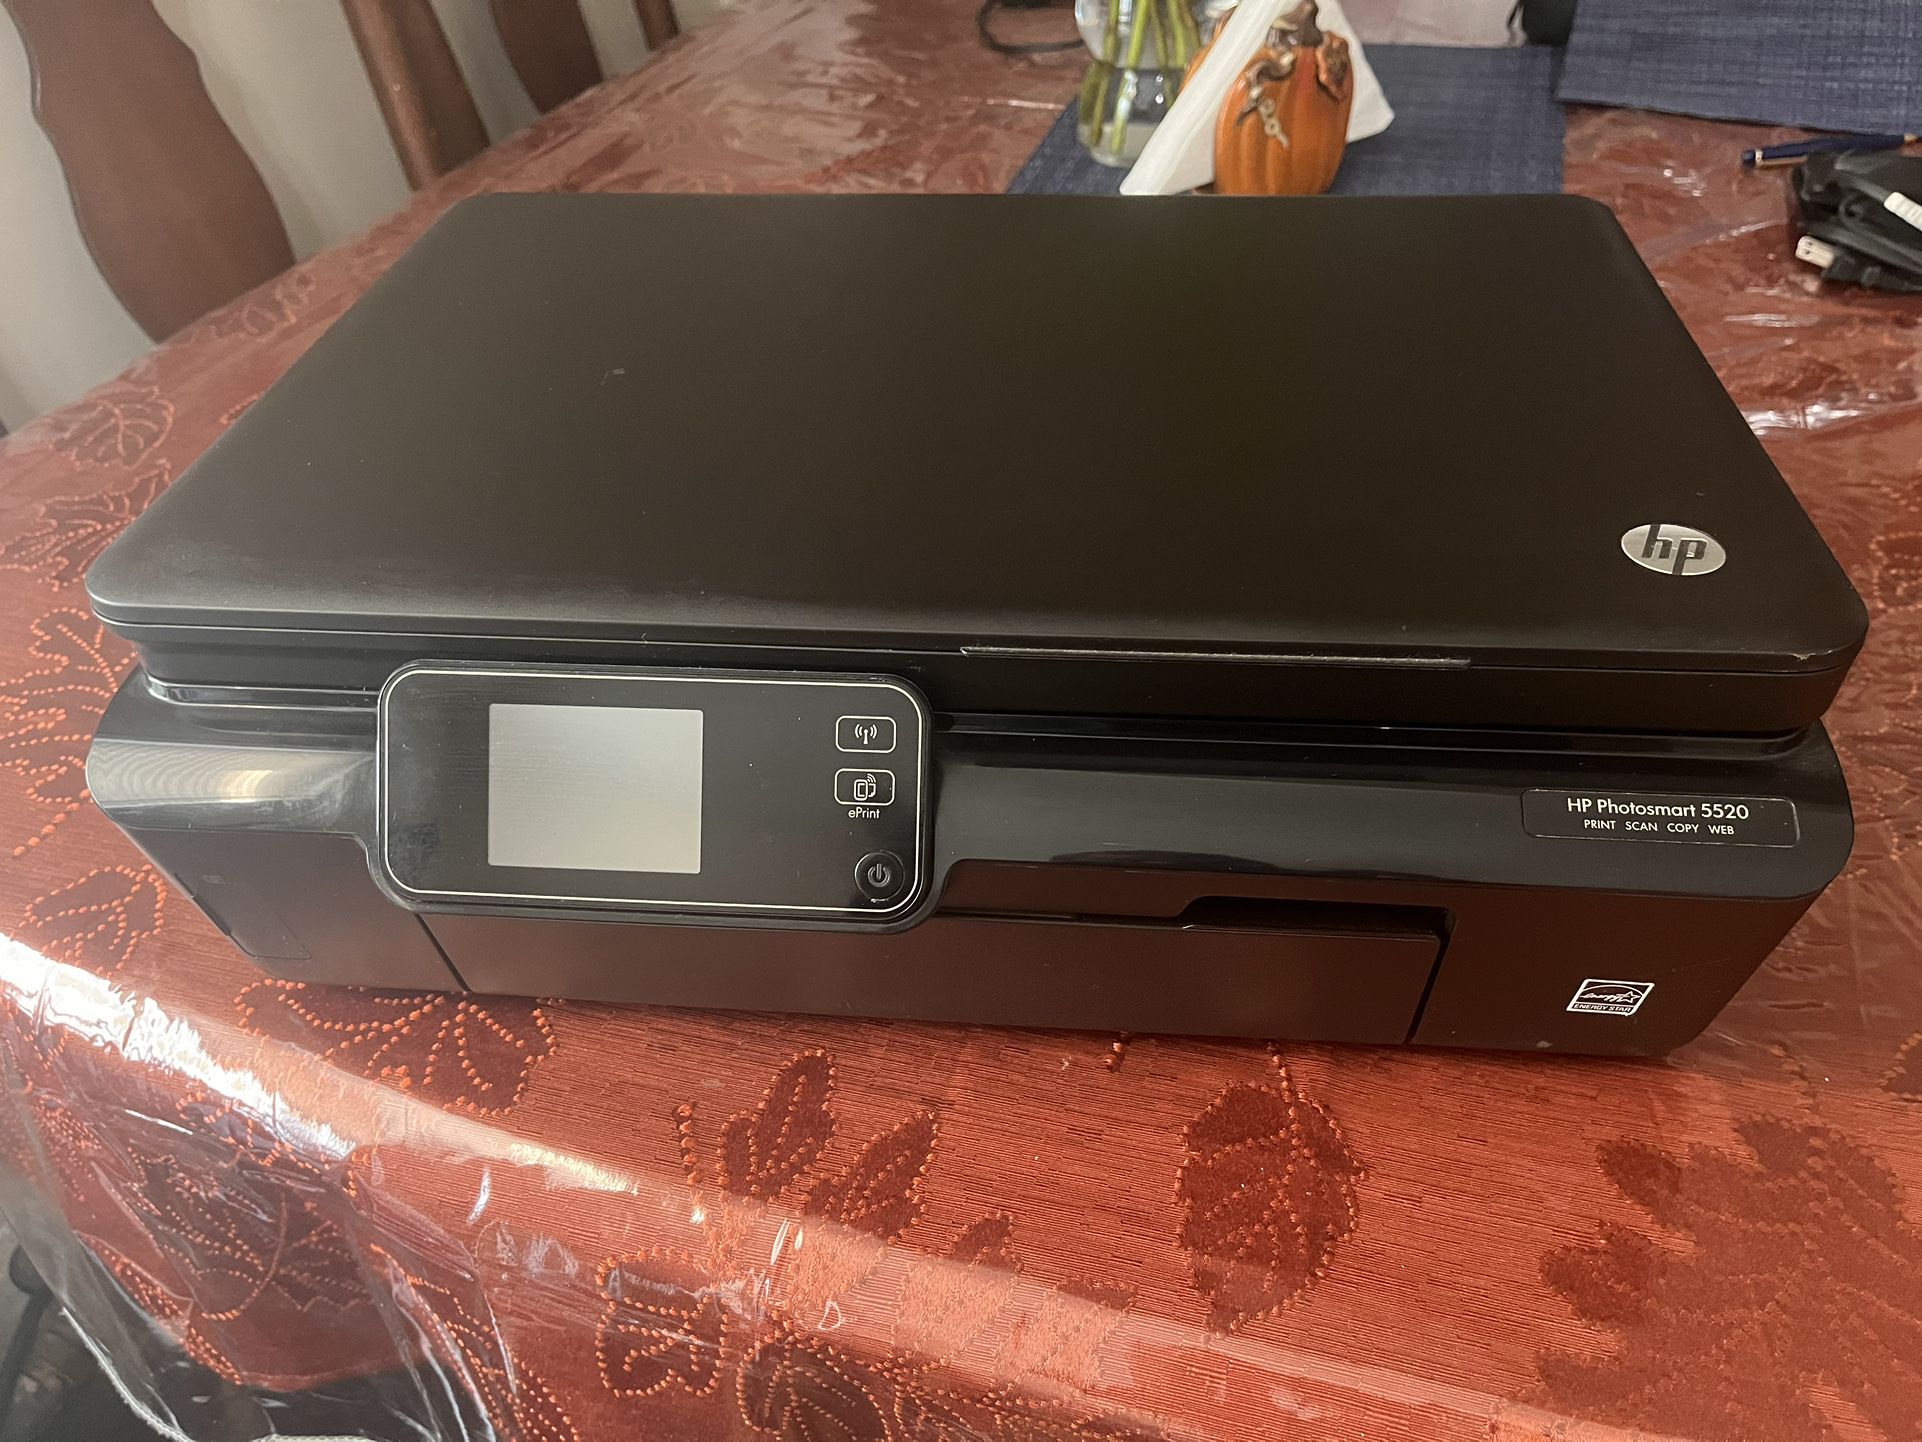 Printer Photosmart 5520 PRINT SCAN COPY WEB for Sale in Queens, NY OfferUp